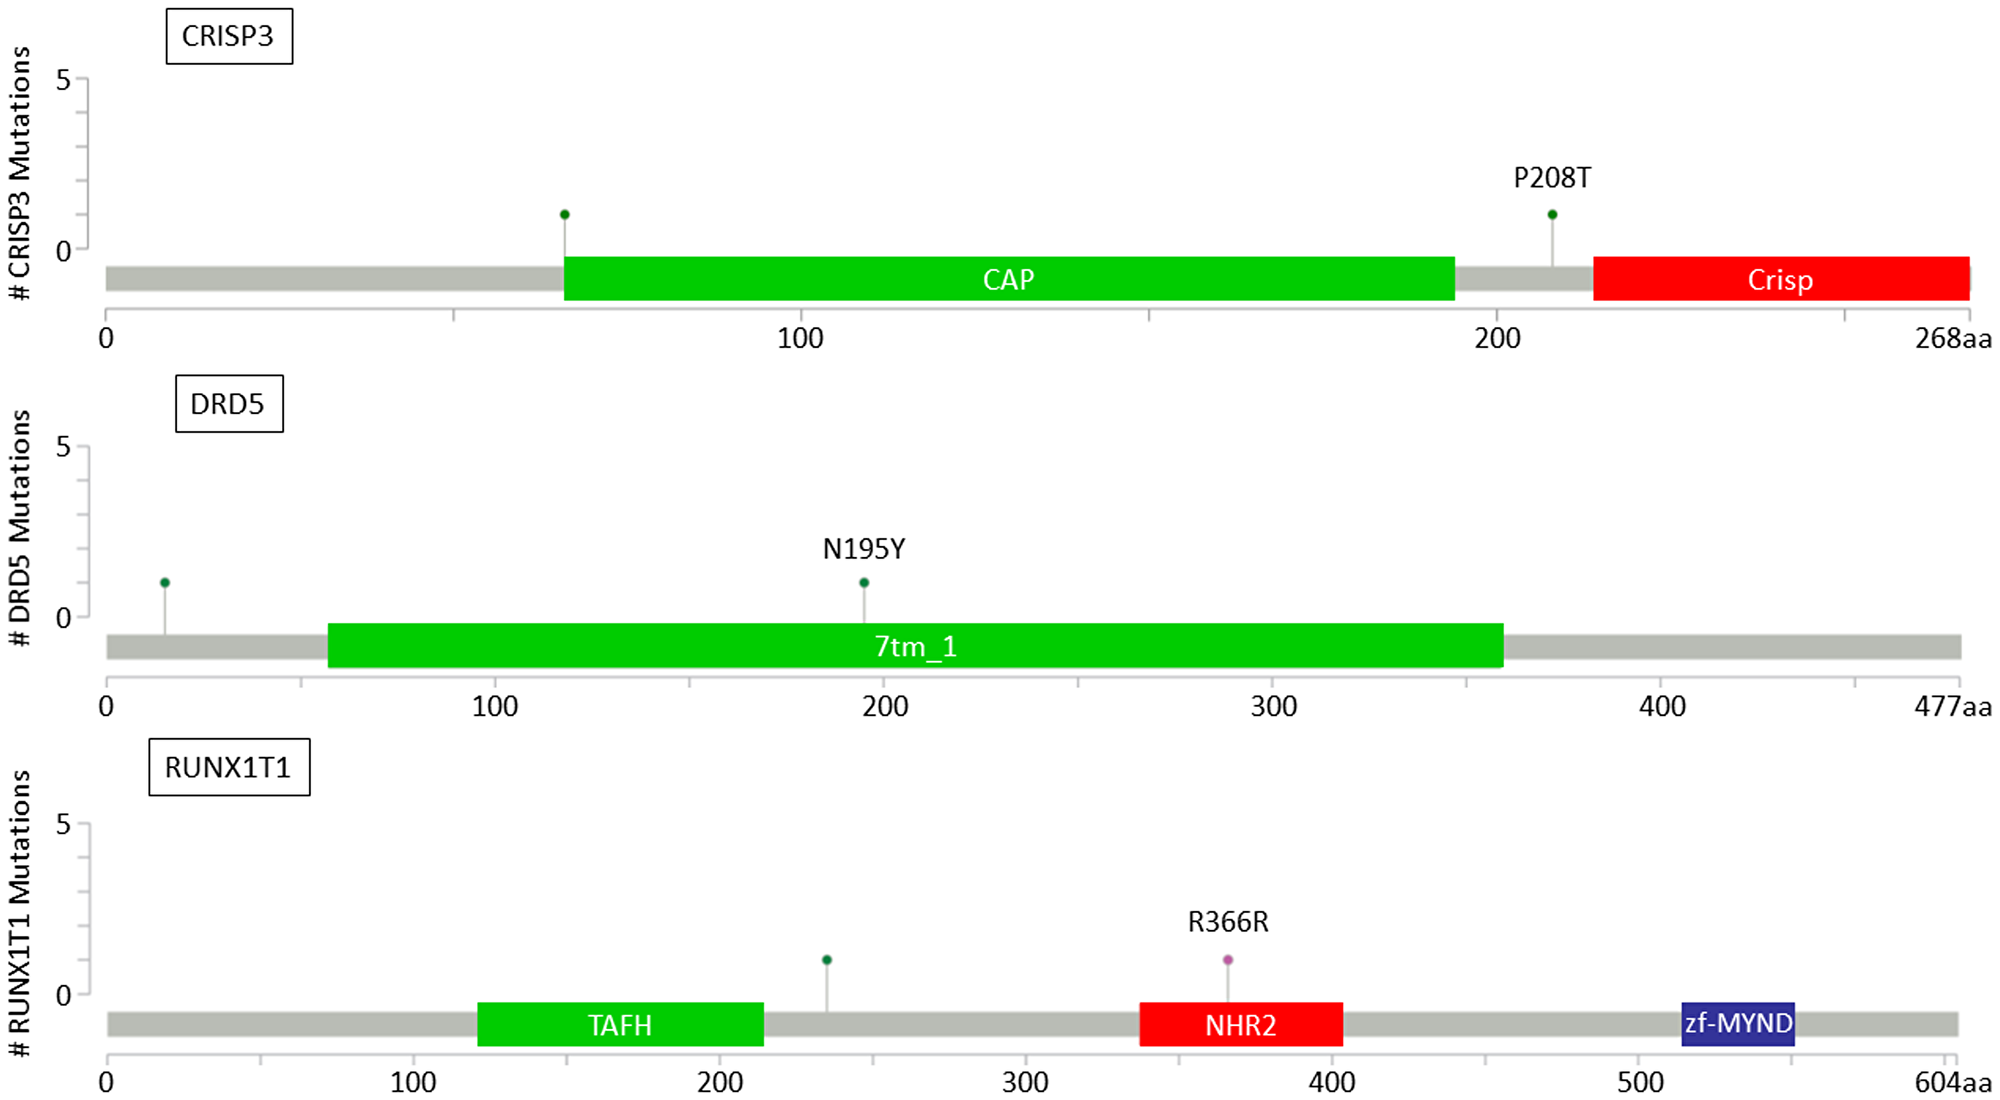 Figure 4: Lollipop plots for  CRISP3,  DRD5 and  RUNX1T1 genes showing identified variants relative to a schematic representation of the gene.